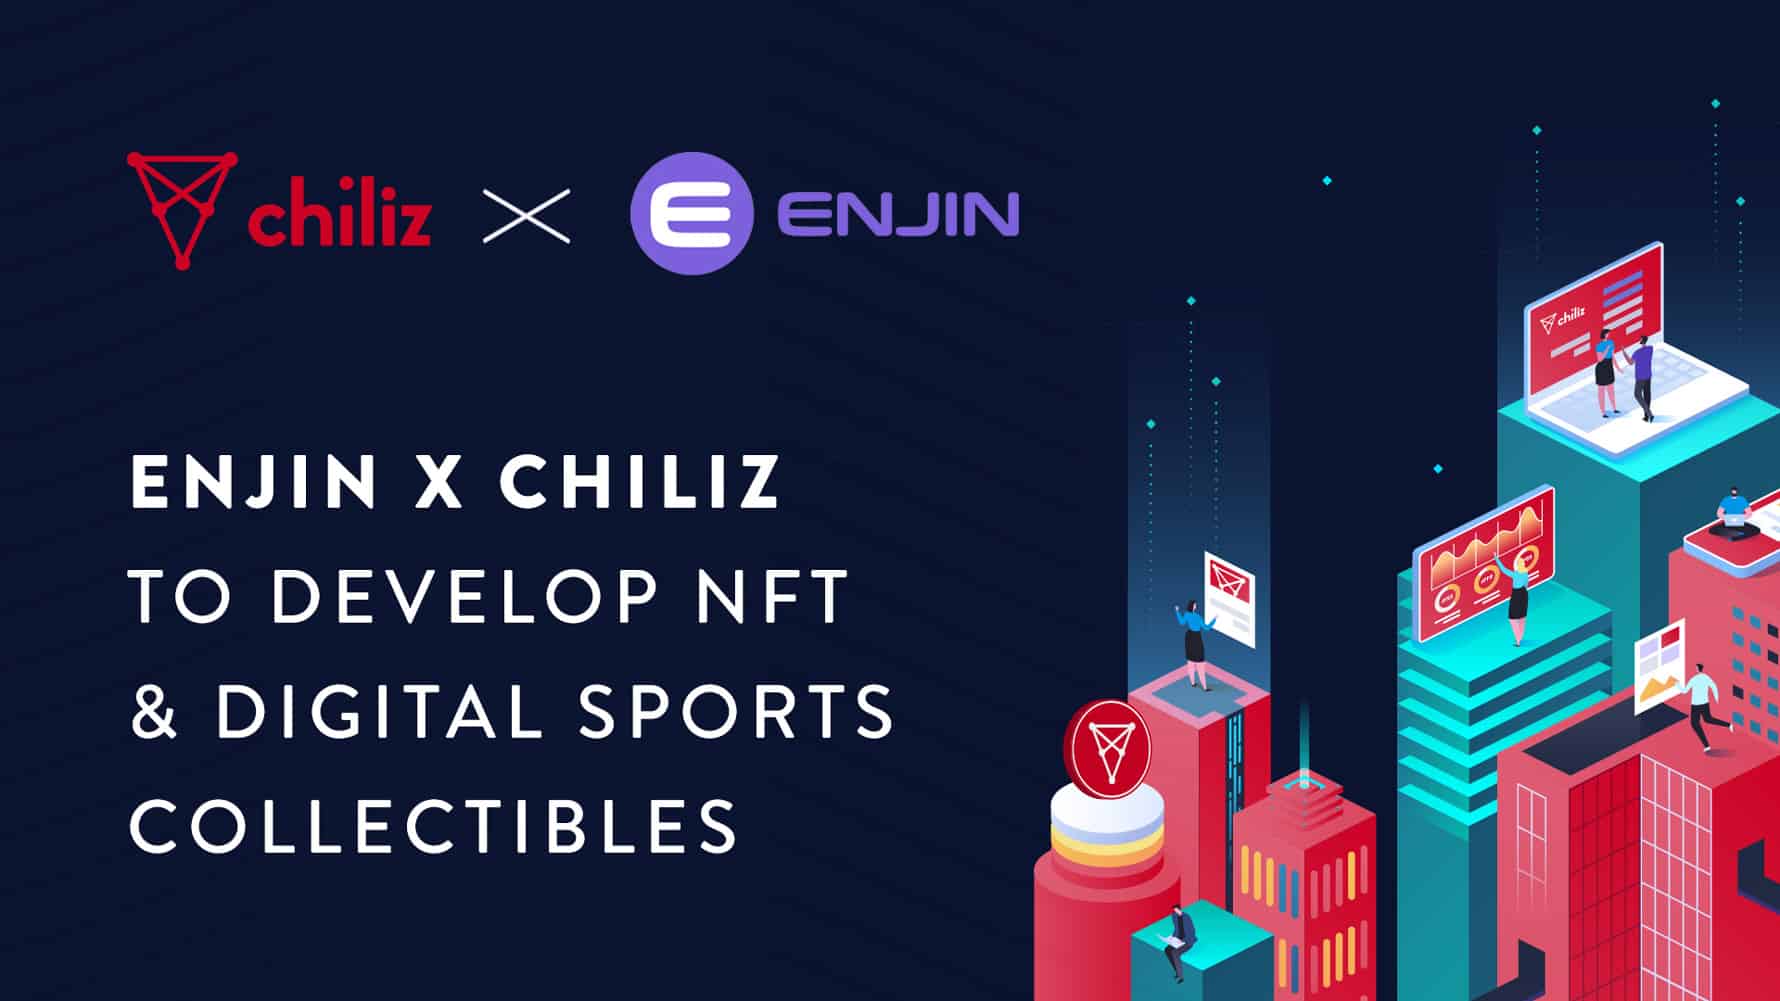 enjin chiliz partnership This new partnership brings Chiliz in the position to offer branded non-fungible tokens to the full roster of Socios.com which includes some of the biggest names in football including esports and the Entertainment industry. A.S Roma and Galatasaray are also among them.